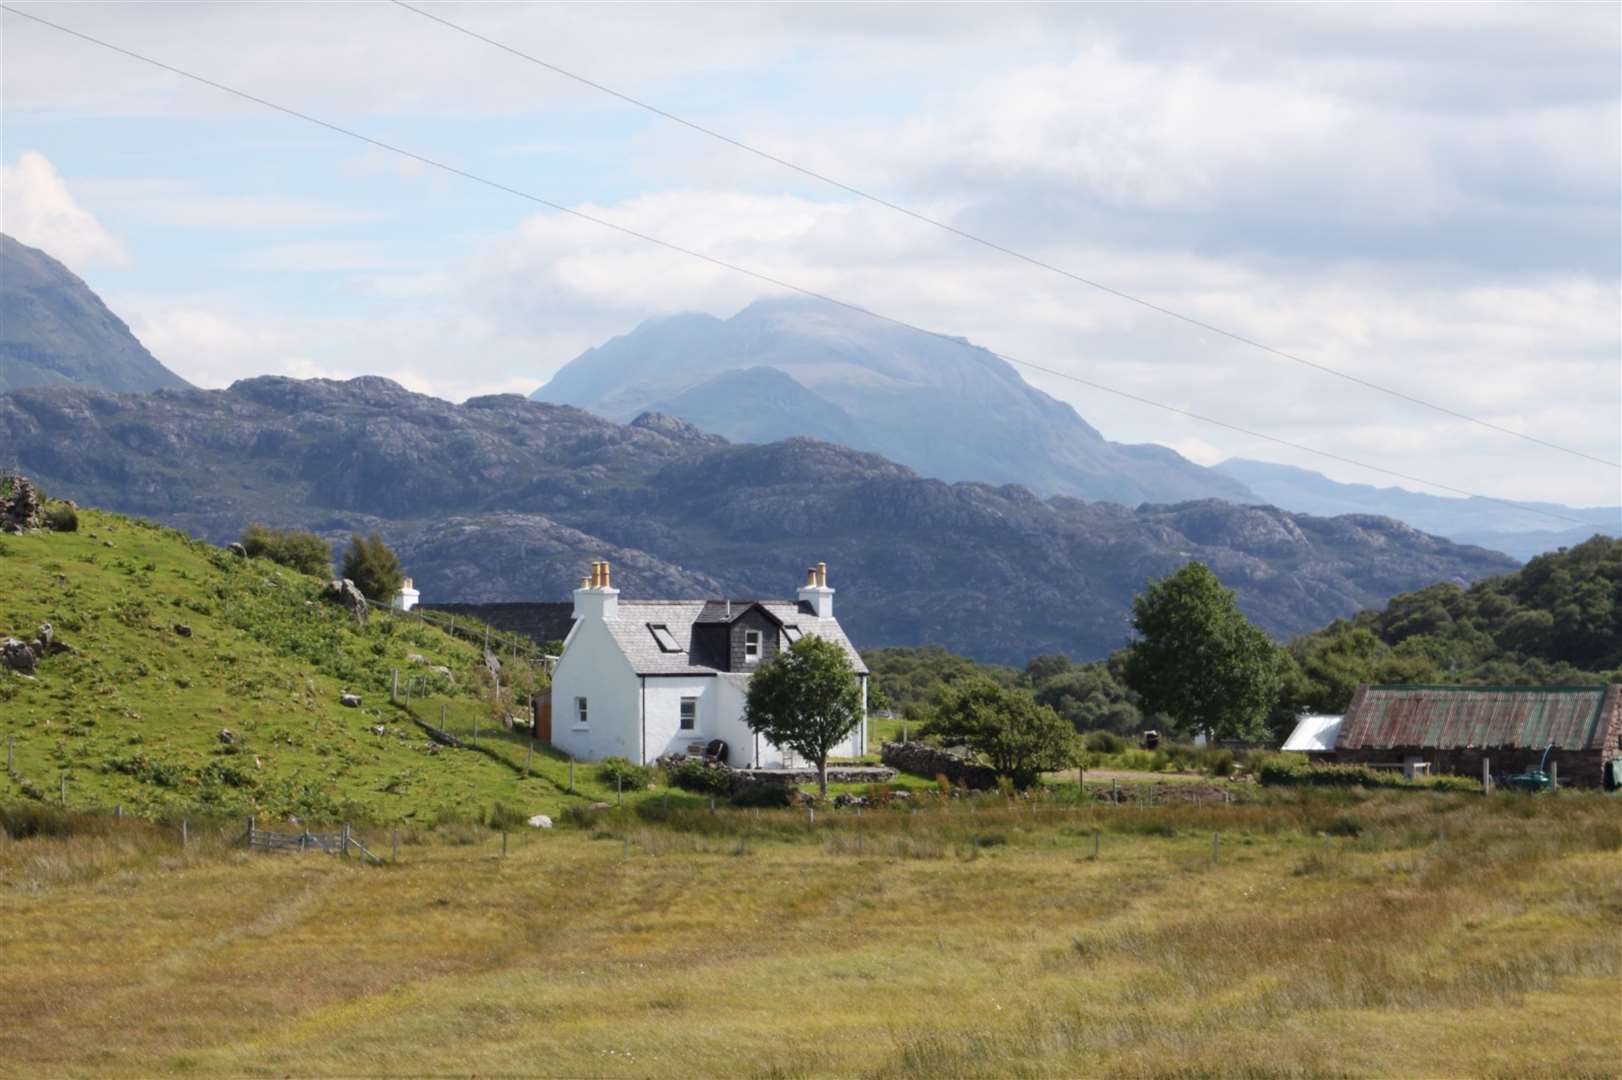 Despite lockdown conditions again hampering business at the start of 2021, the Highlands still proved attractive to housebuyers.